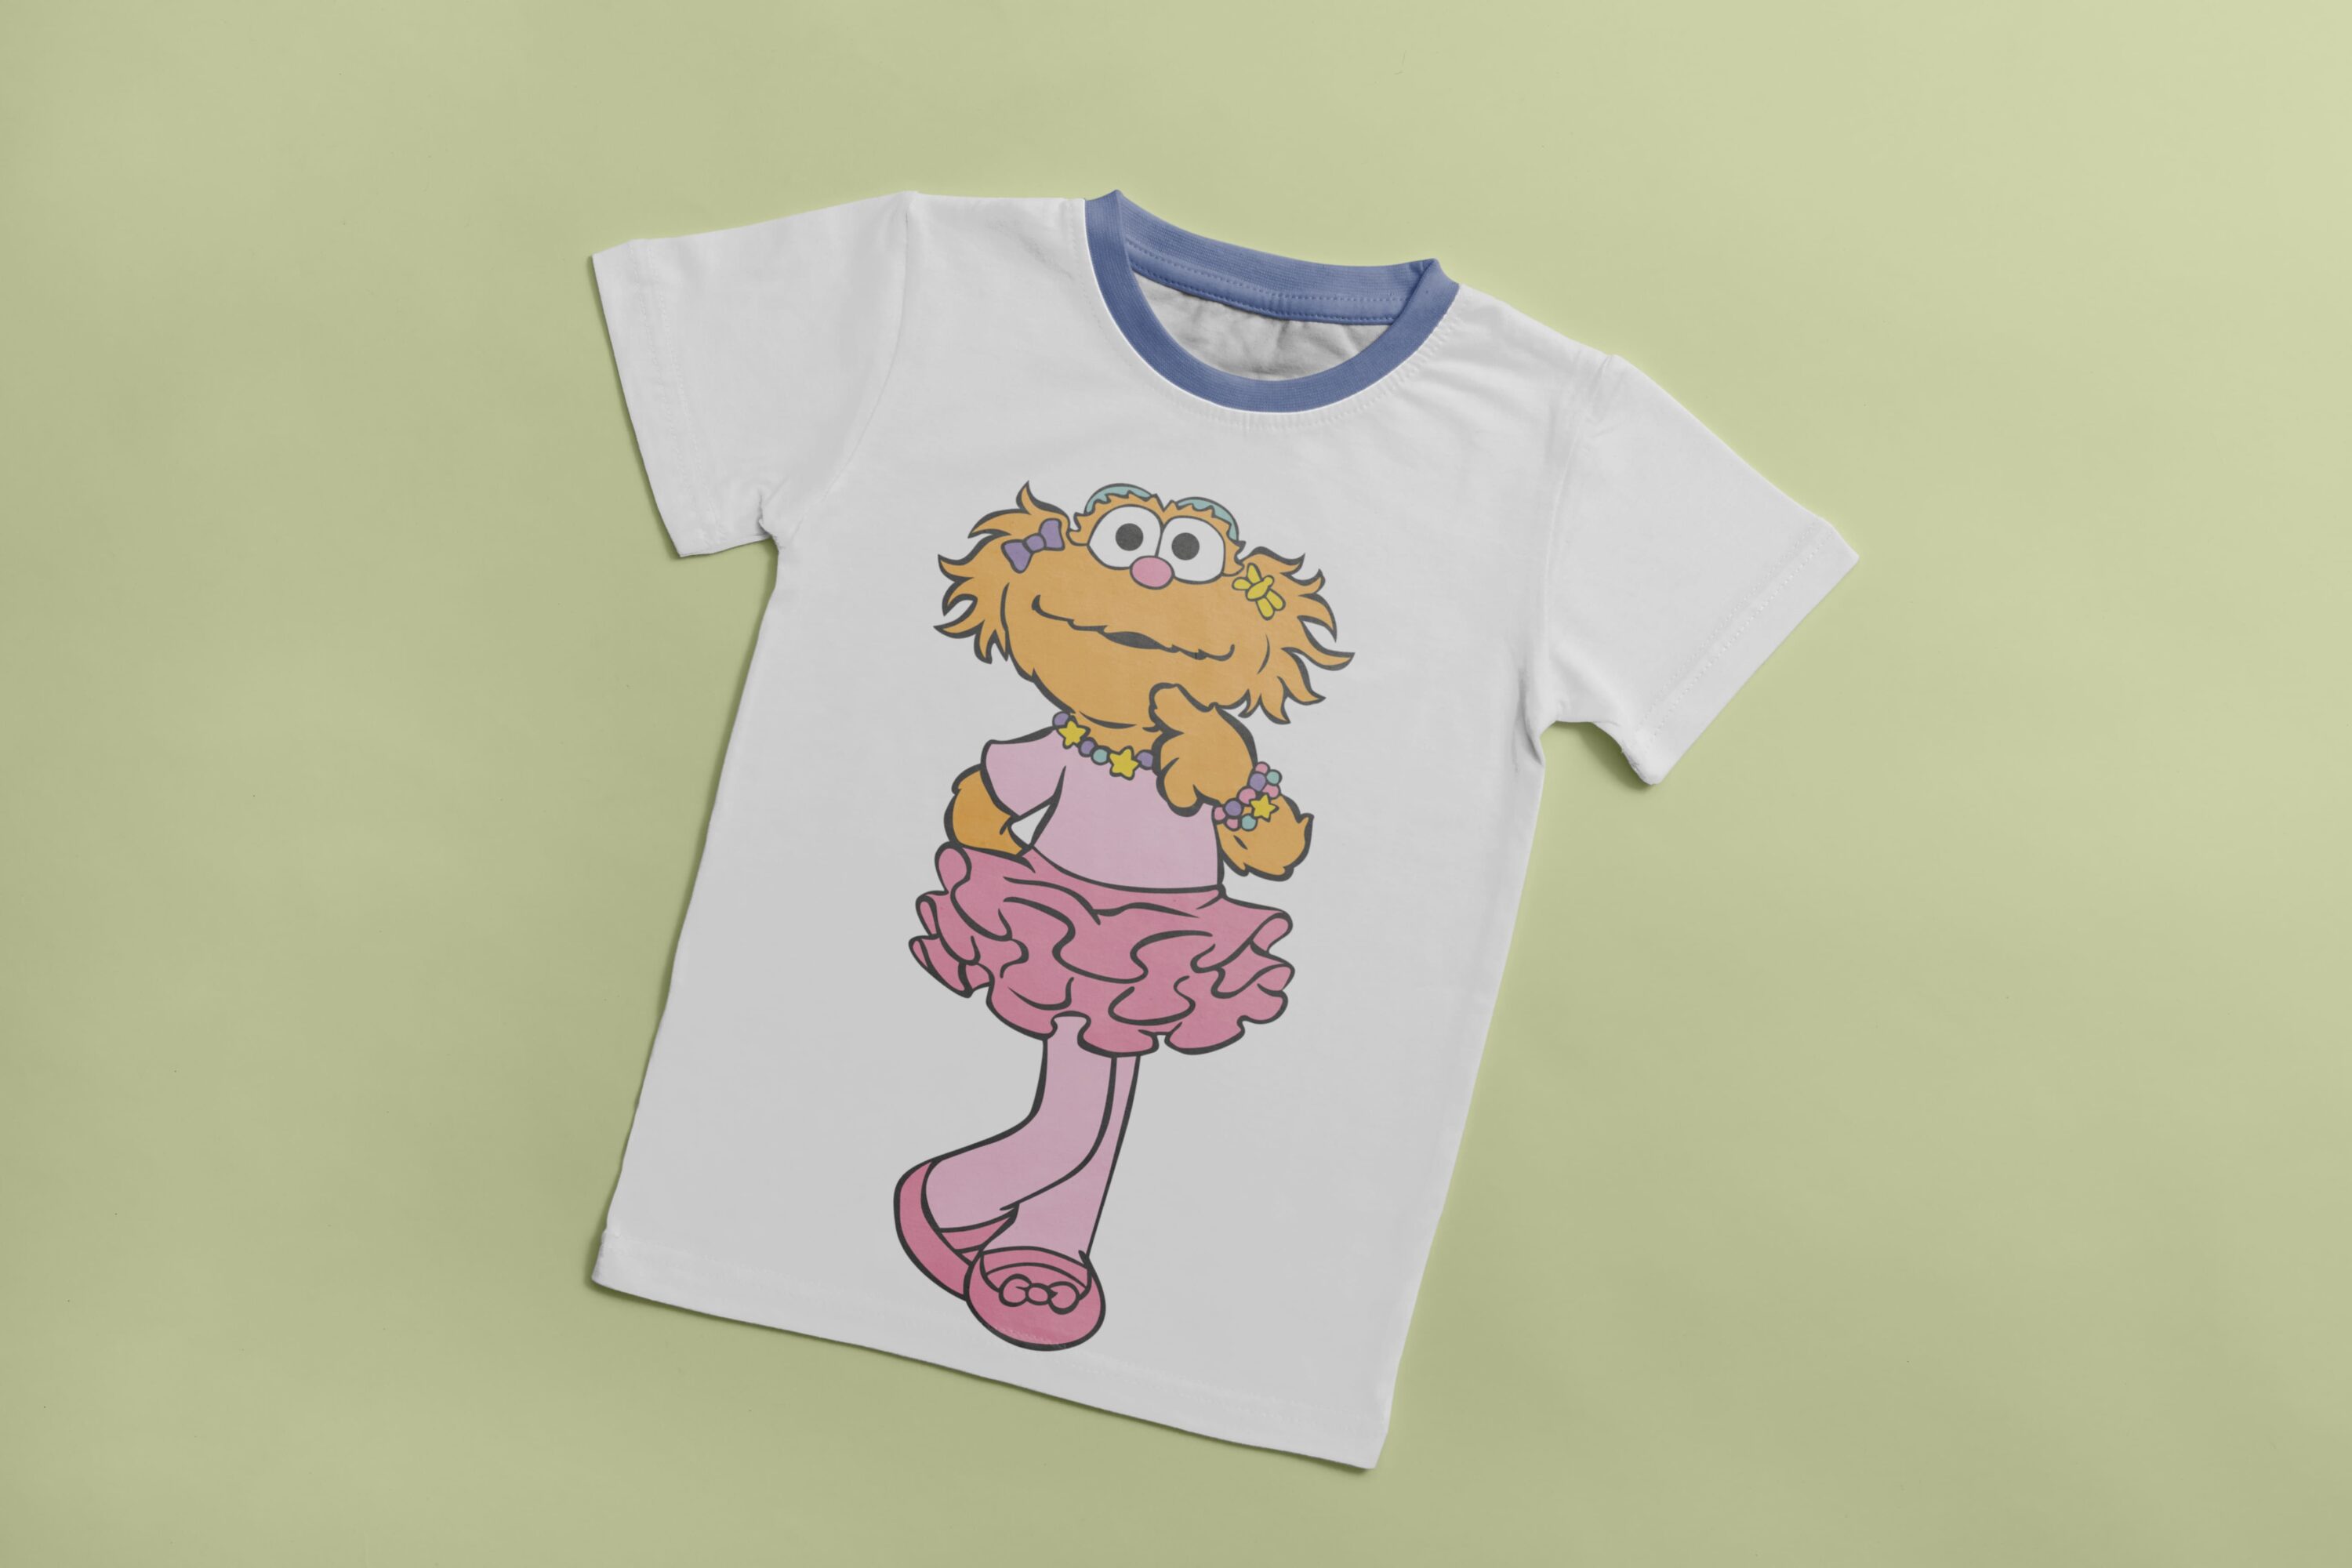 White T-shirt with a blue collar and an image of a dancing Cookie Monster.